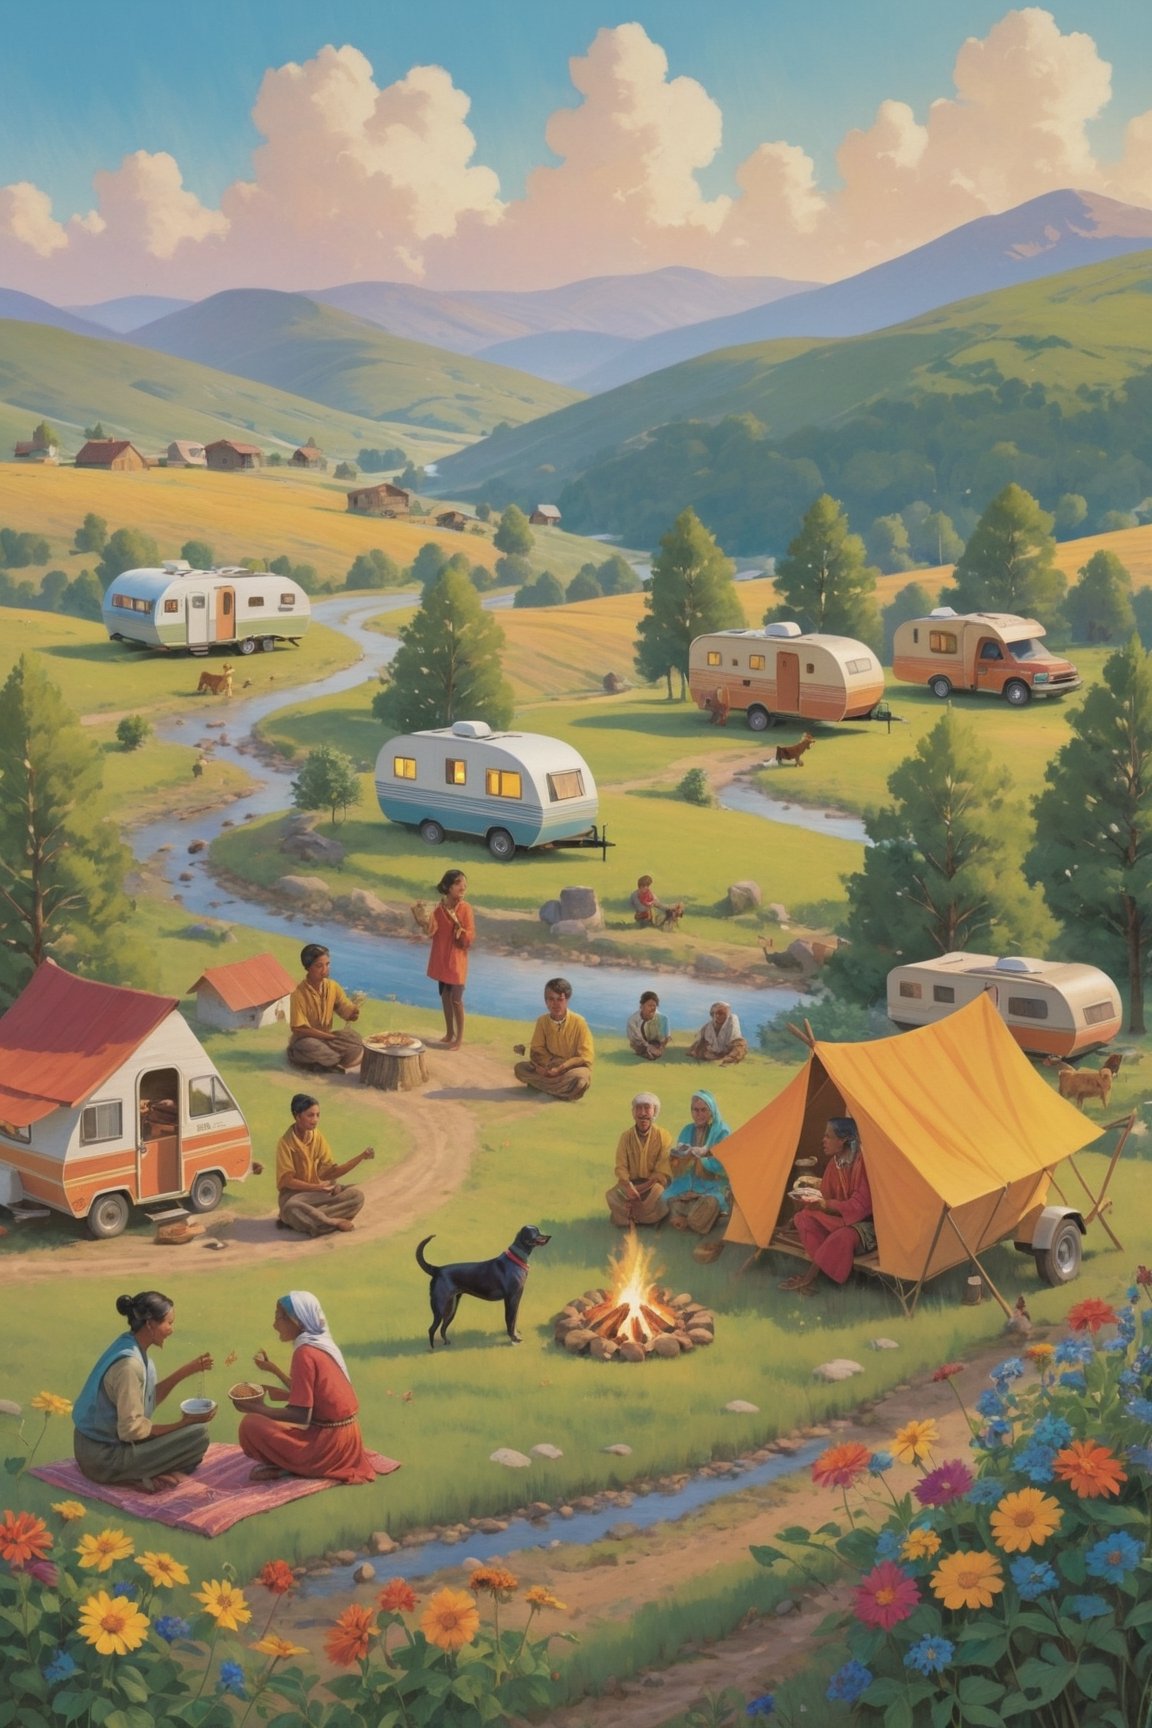 Scene: A serene, sun-drenched valley nestled amidst rolling hills. A semicircle of vibrant RVs and trailers, their roofs adorned with gleaming solar panels and gentle wind turbines, forms a cozy community. In the heart of the semicircle, a crackling campfire casts warm hues on laughter-filled faces.

Foreground:

Villagers of all ages gather around the campfire, their voices blending in joyful conversation. Musicians strum guitars and tap on drums, their melodies weaving through the air. Children twirl and dance, their laughter echoing like wind chimes.
A communal table laden with fresh-baked bread, colorful fruits, and steaming mugs of tea invites sharing and laughter. A playful dog bounds between the legs of villagers, tail wagging like a metronome.
Smoke from the campfire dances upwards, carrying the scent of pine and roasted marshmallows. The air is alive with the chirping of crickets and the rustling of leaves.
Background:

Sunlight bathes the RVs and trailers in warm gold, reflecting off their polished surfaces. Clotheslines strung between them flutter with brightly colored garments.
In the distance, a rustic garden flourishes with vegetables and herbs, tended to by villagers with sun-kissed faces. Wind turbines gently spin atop a nearby hill, their blades whispering in the breeze.
A meandering stream glistens like a ribbon in the sunlight, its banks dotted with wildflowers and buzzing with bees.
Mood:

Peaceful, joyful, and harmonious. A sense of community and self-sufficiency radiates from the scene.
Capture the vibrant colors of the RVs, the warm glow of the campfire, and the carefree expressions on the villagers' faces.
Let the music and laughter dance through the image, creating a sense of movement and life.